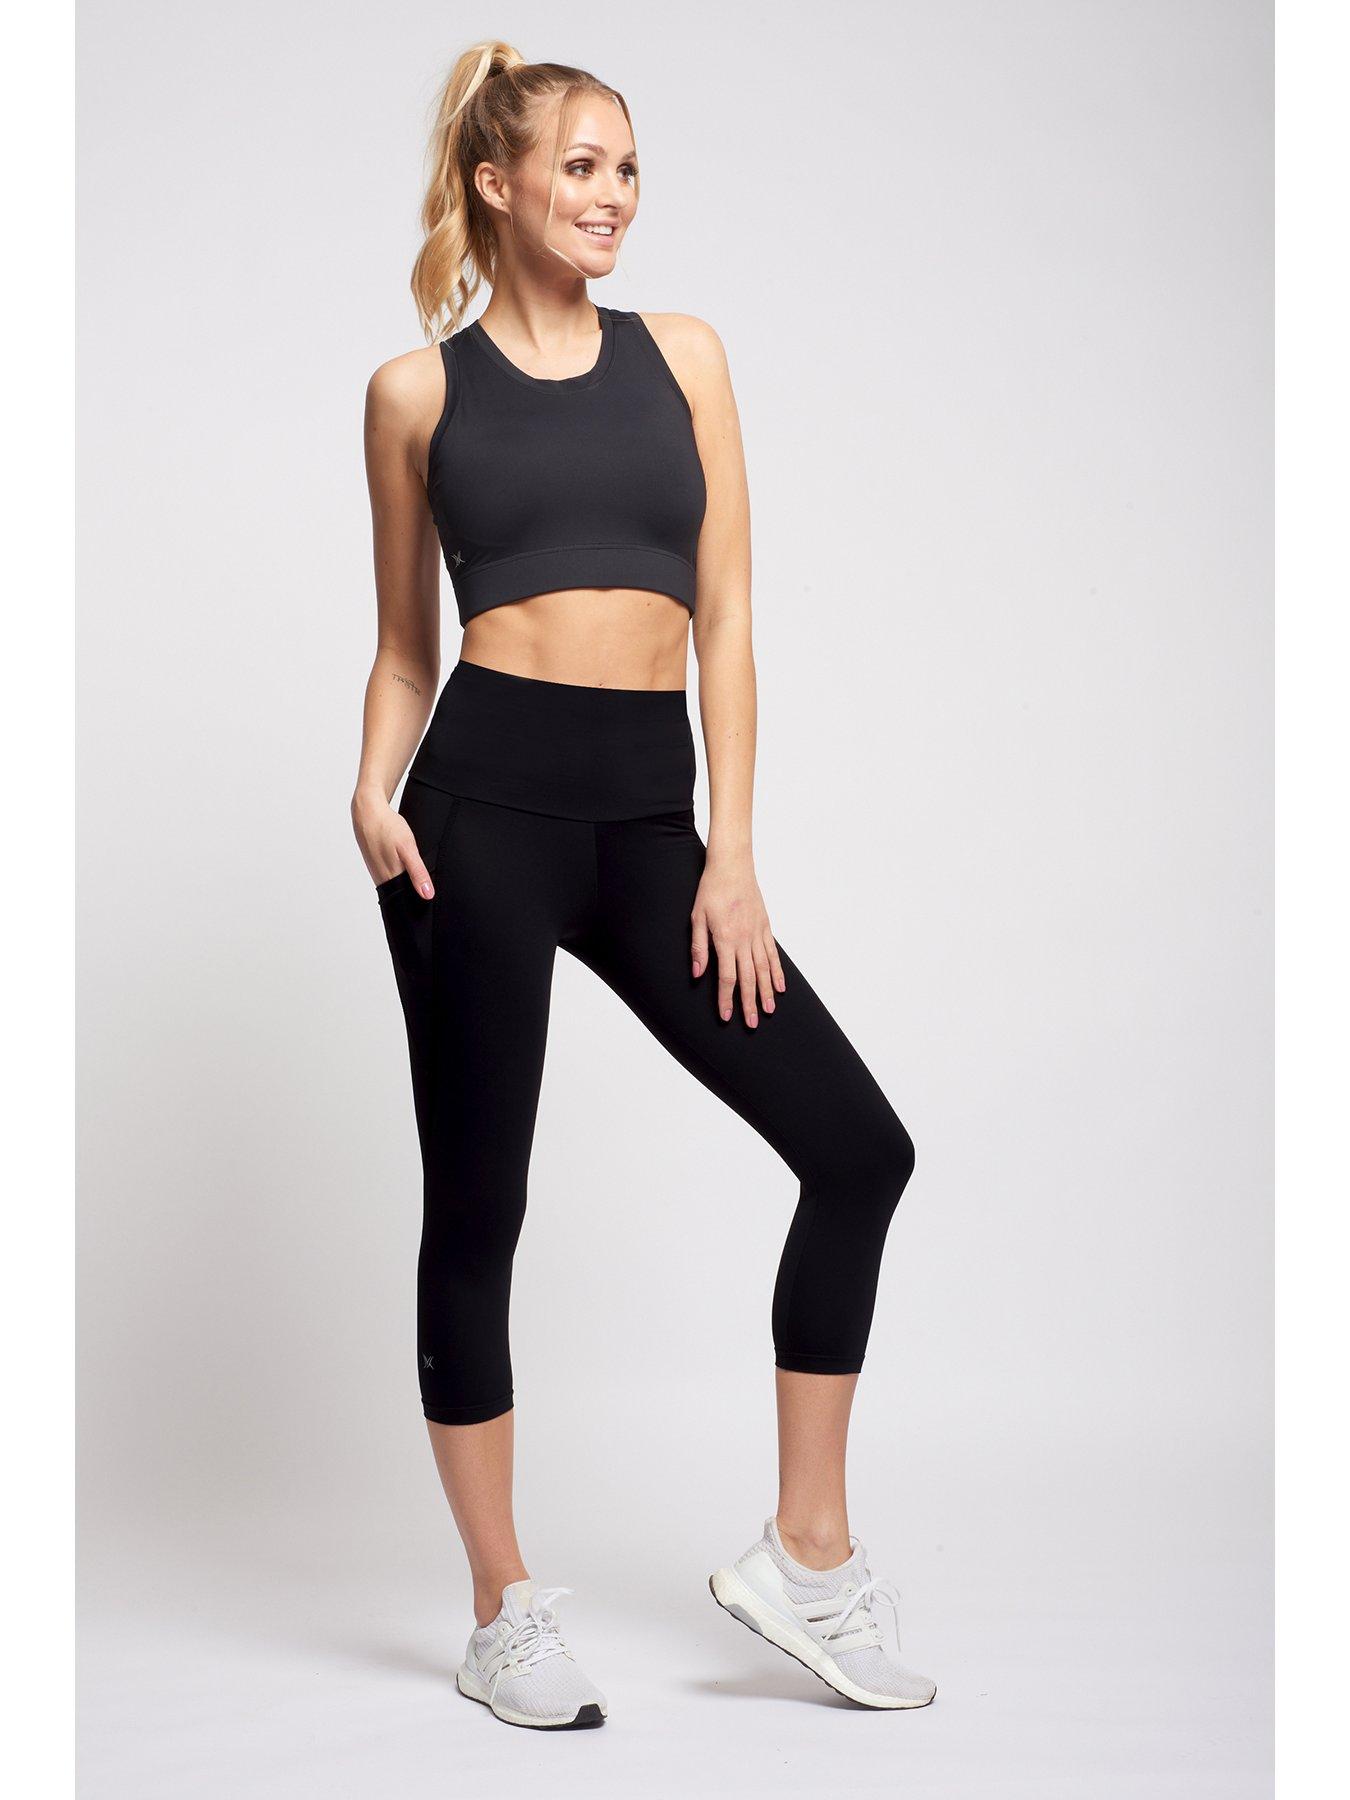 TLC Sport Performance Extra Strong Compression Cropped Leggings